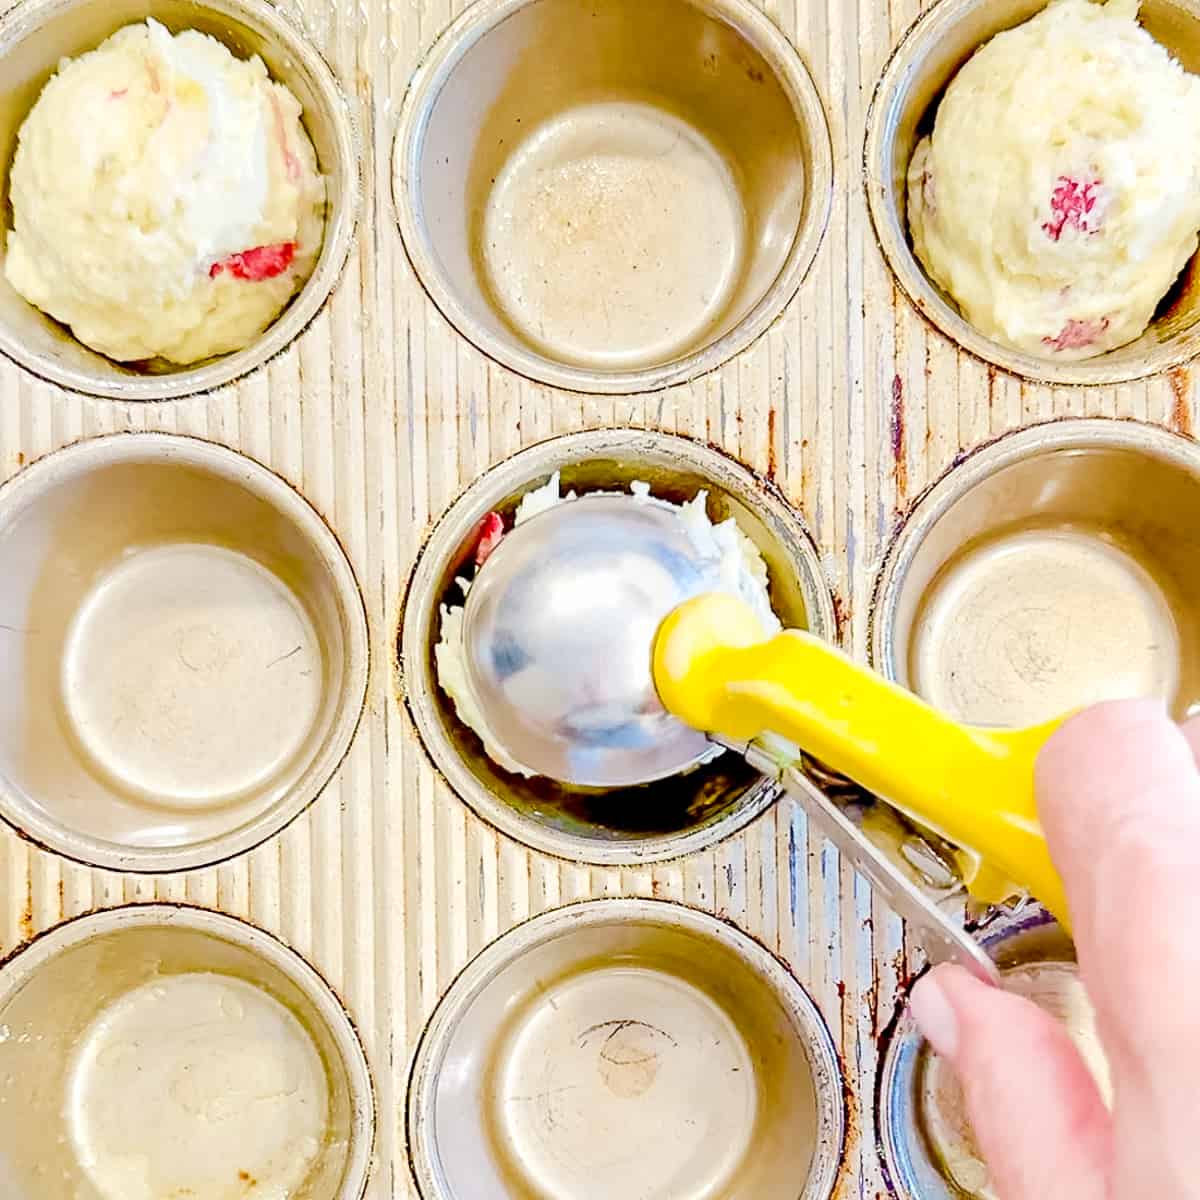 Scooping raspberry banana muffins into a muffin pan.